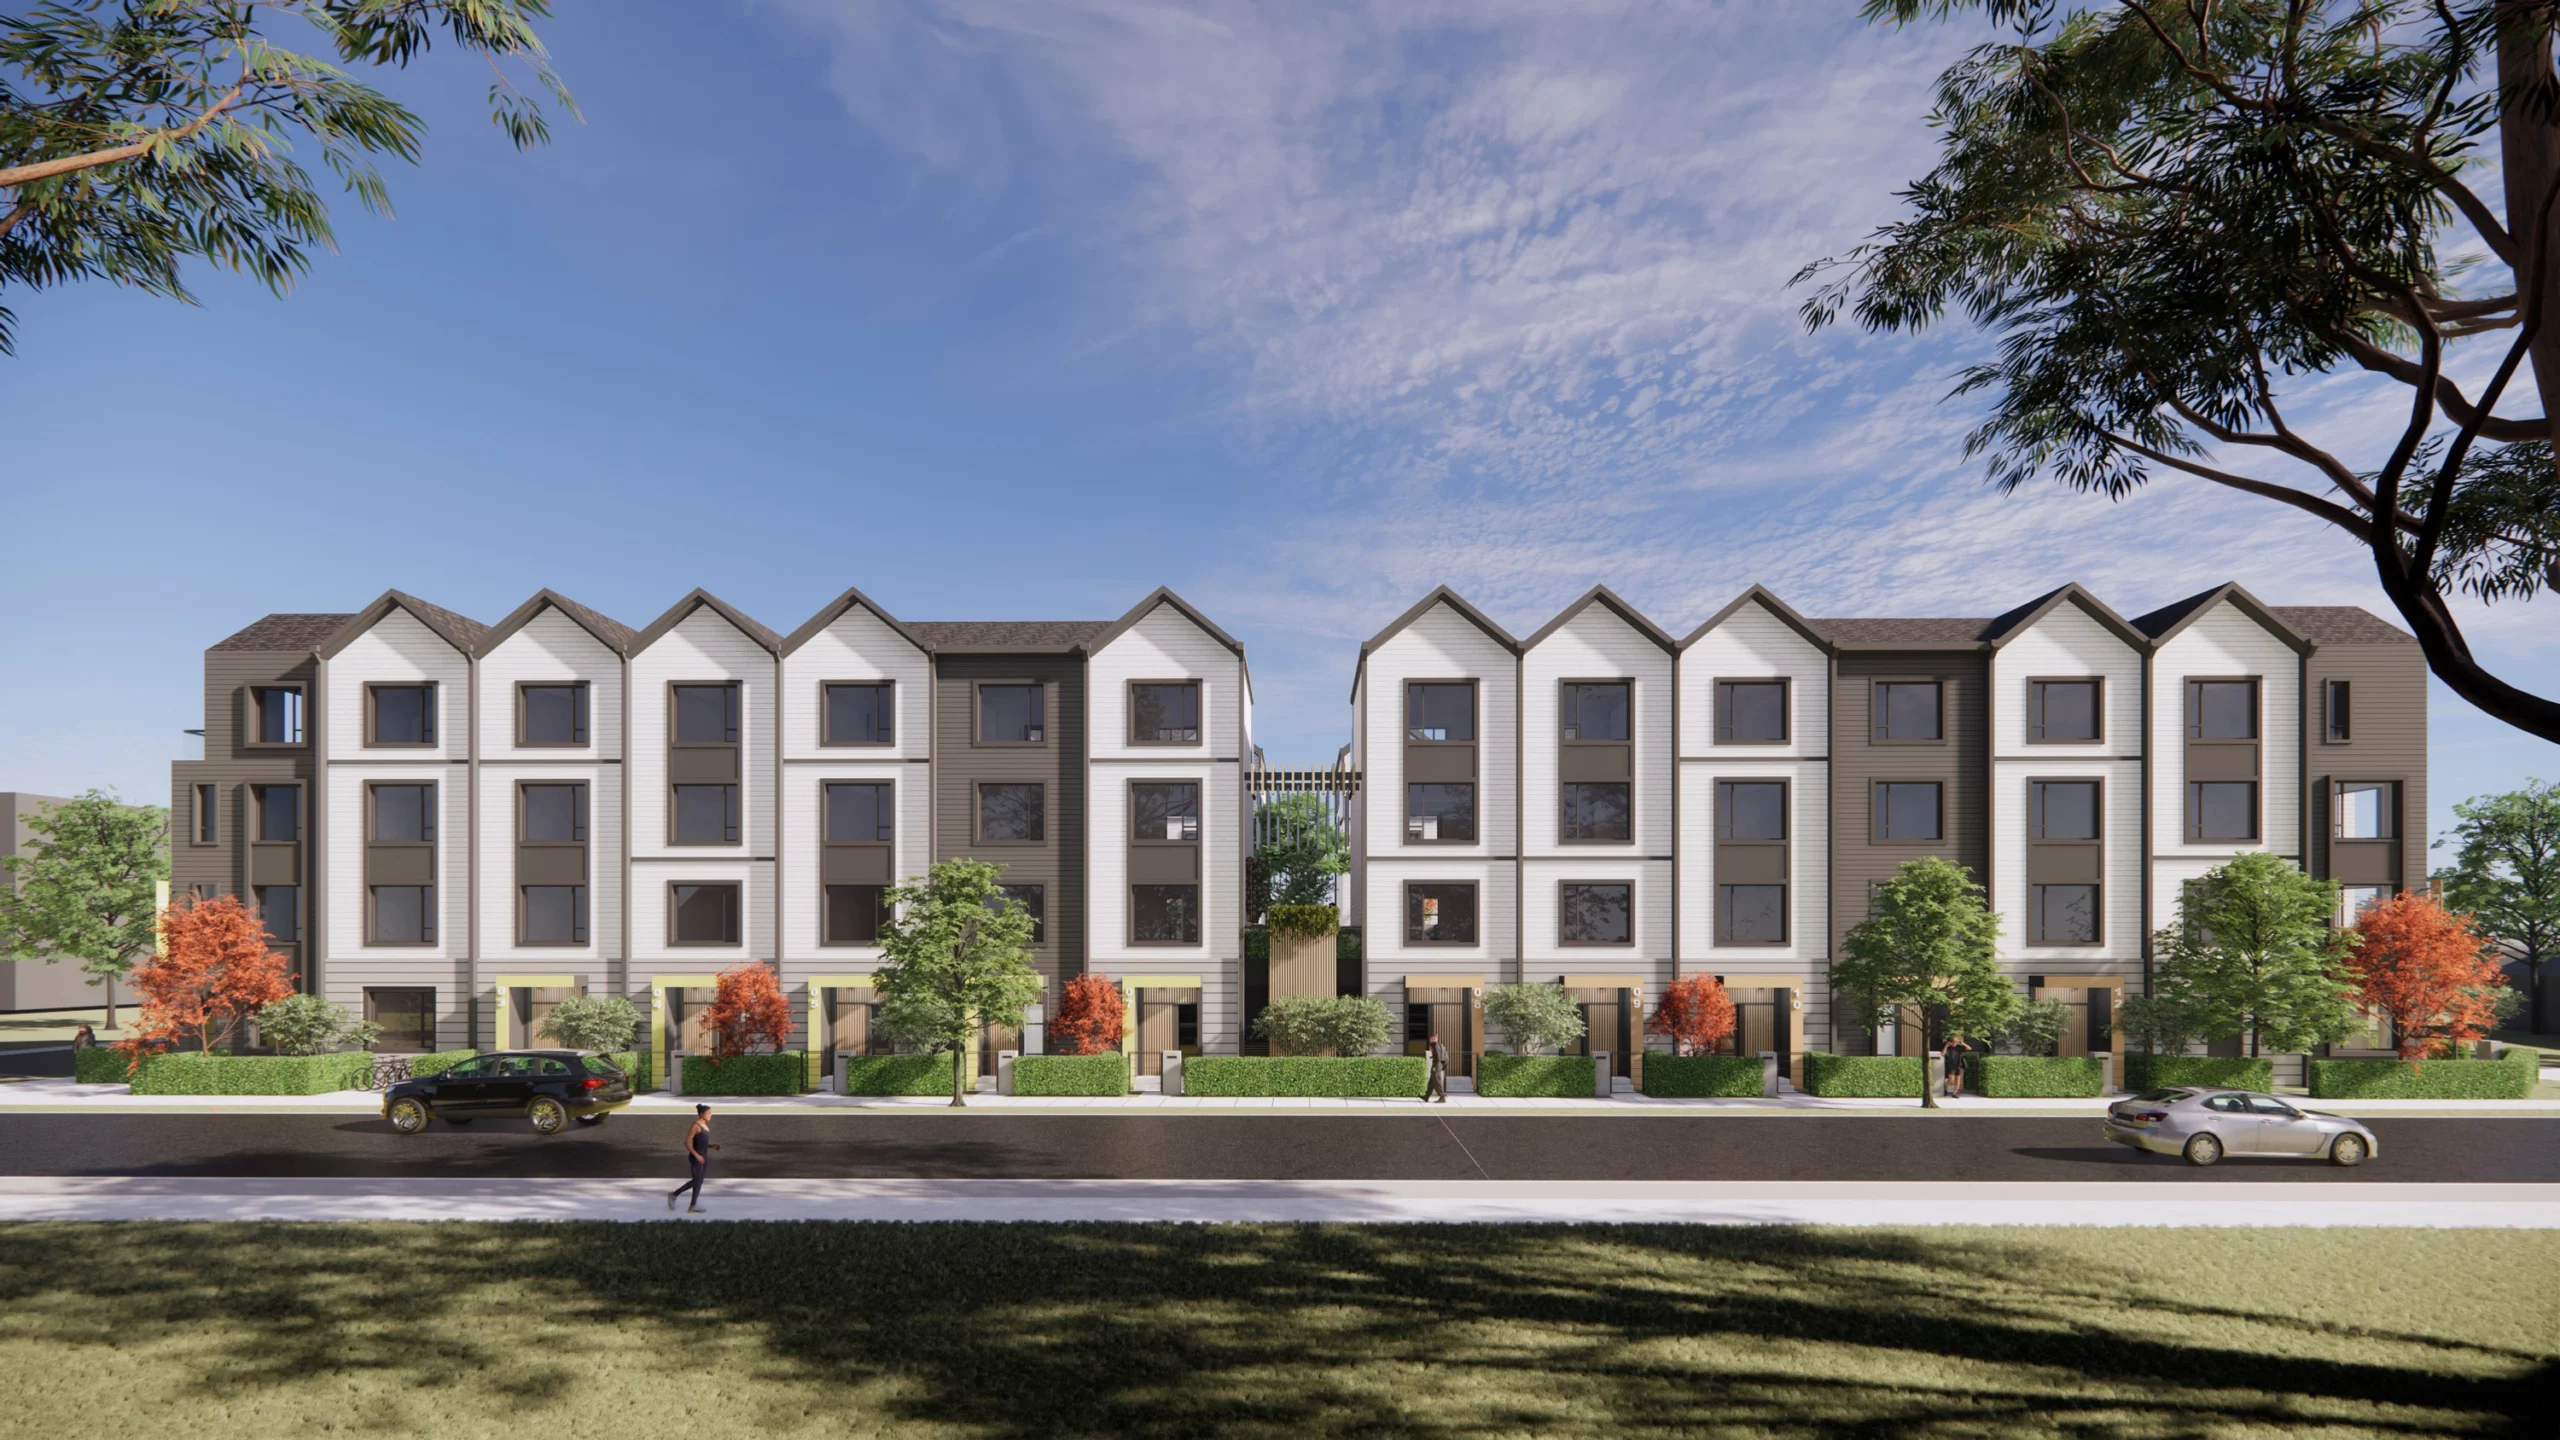 8899 Spires is a 28-unit Richmond townhome development by TopStream Group.